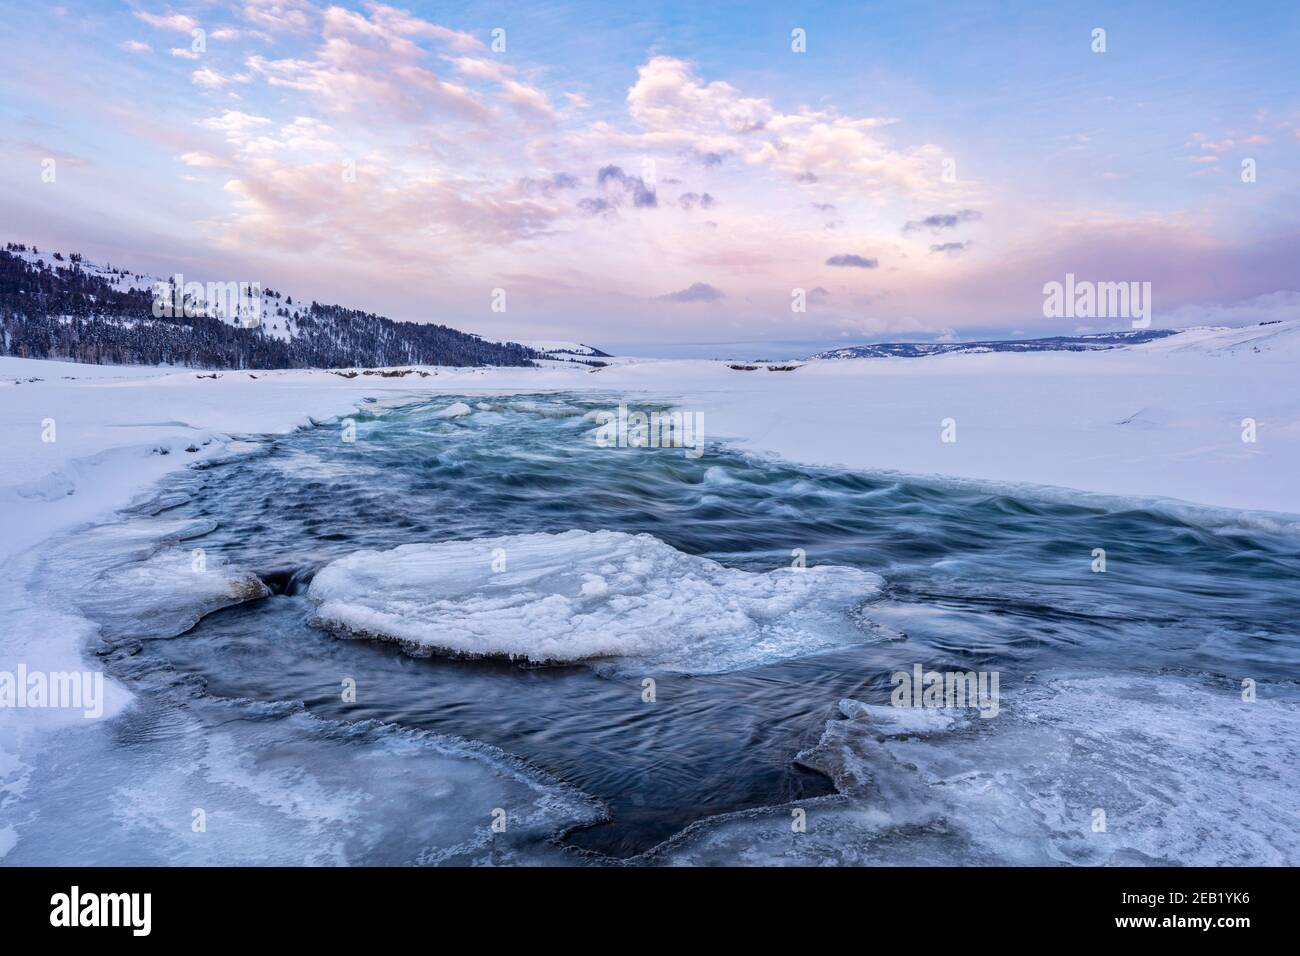 Yellowstone National Park, Wyoming: Lamar River in winter at sunrise Stock Photo